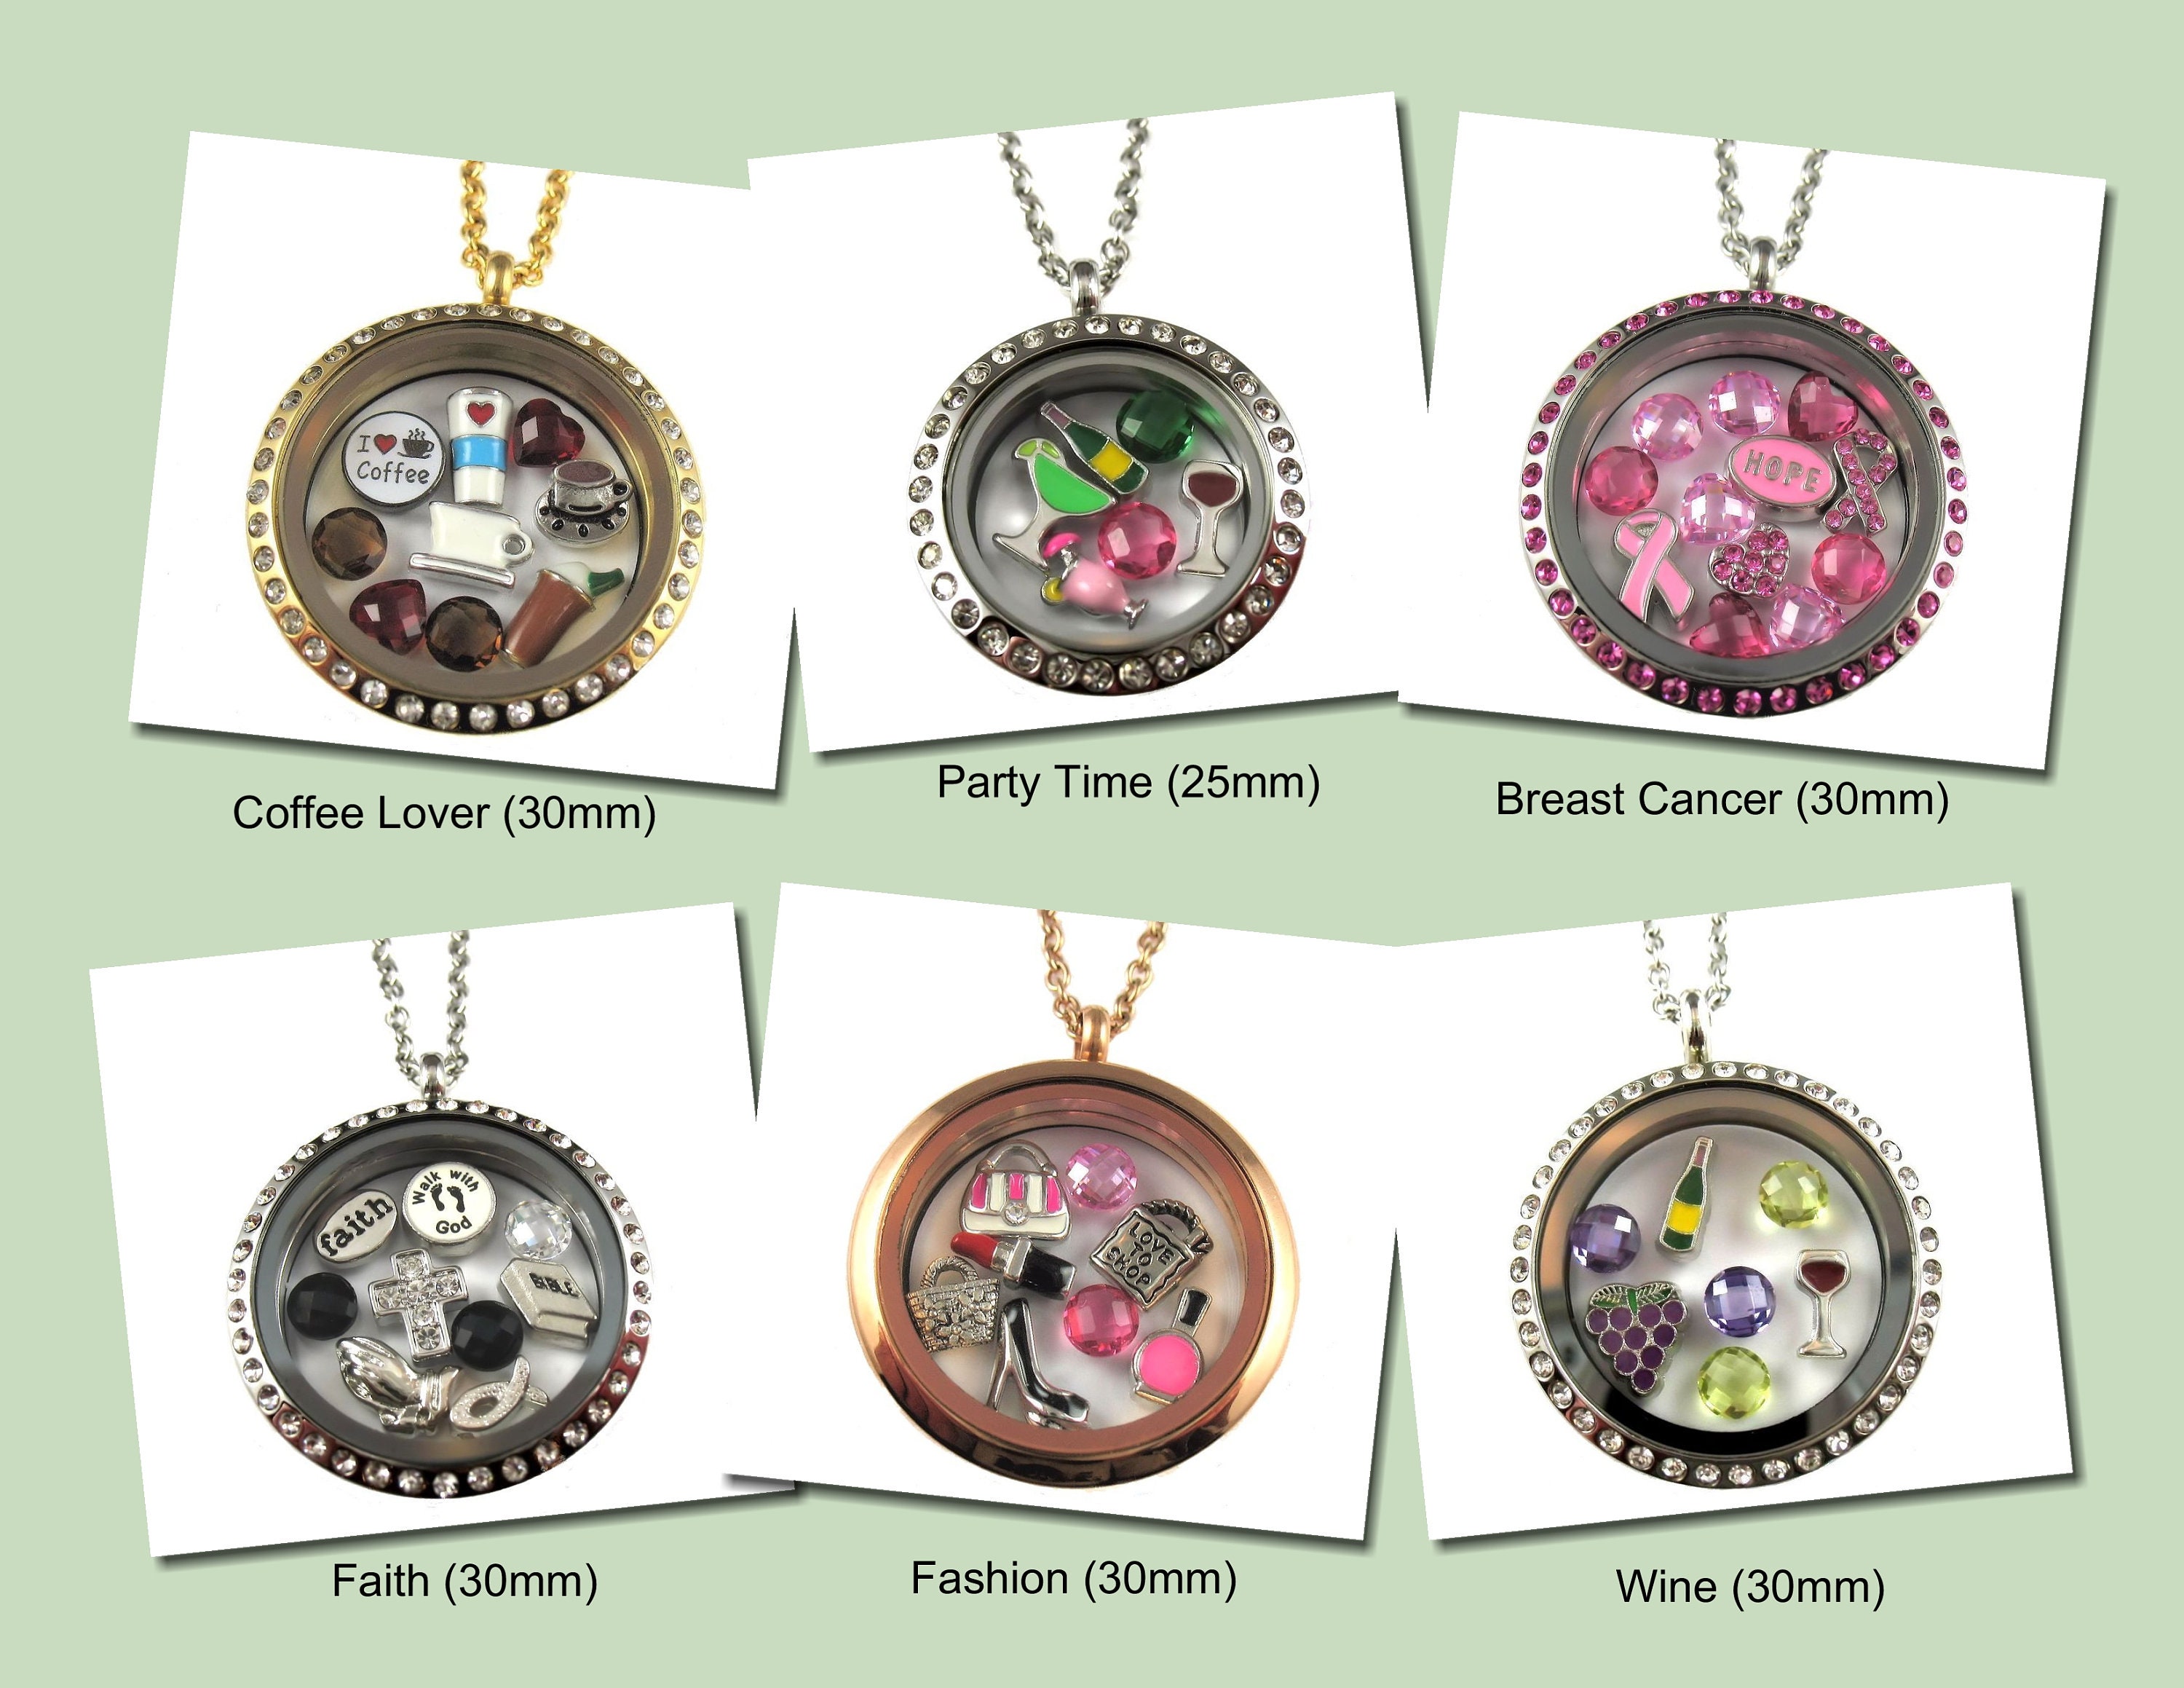 Floating Charm Lockets and Floating Charms, FCL LLC